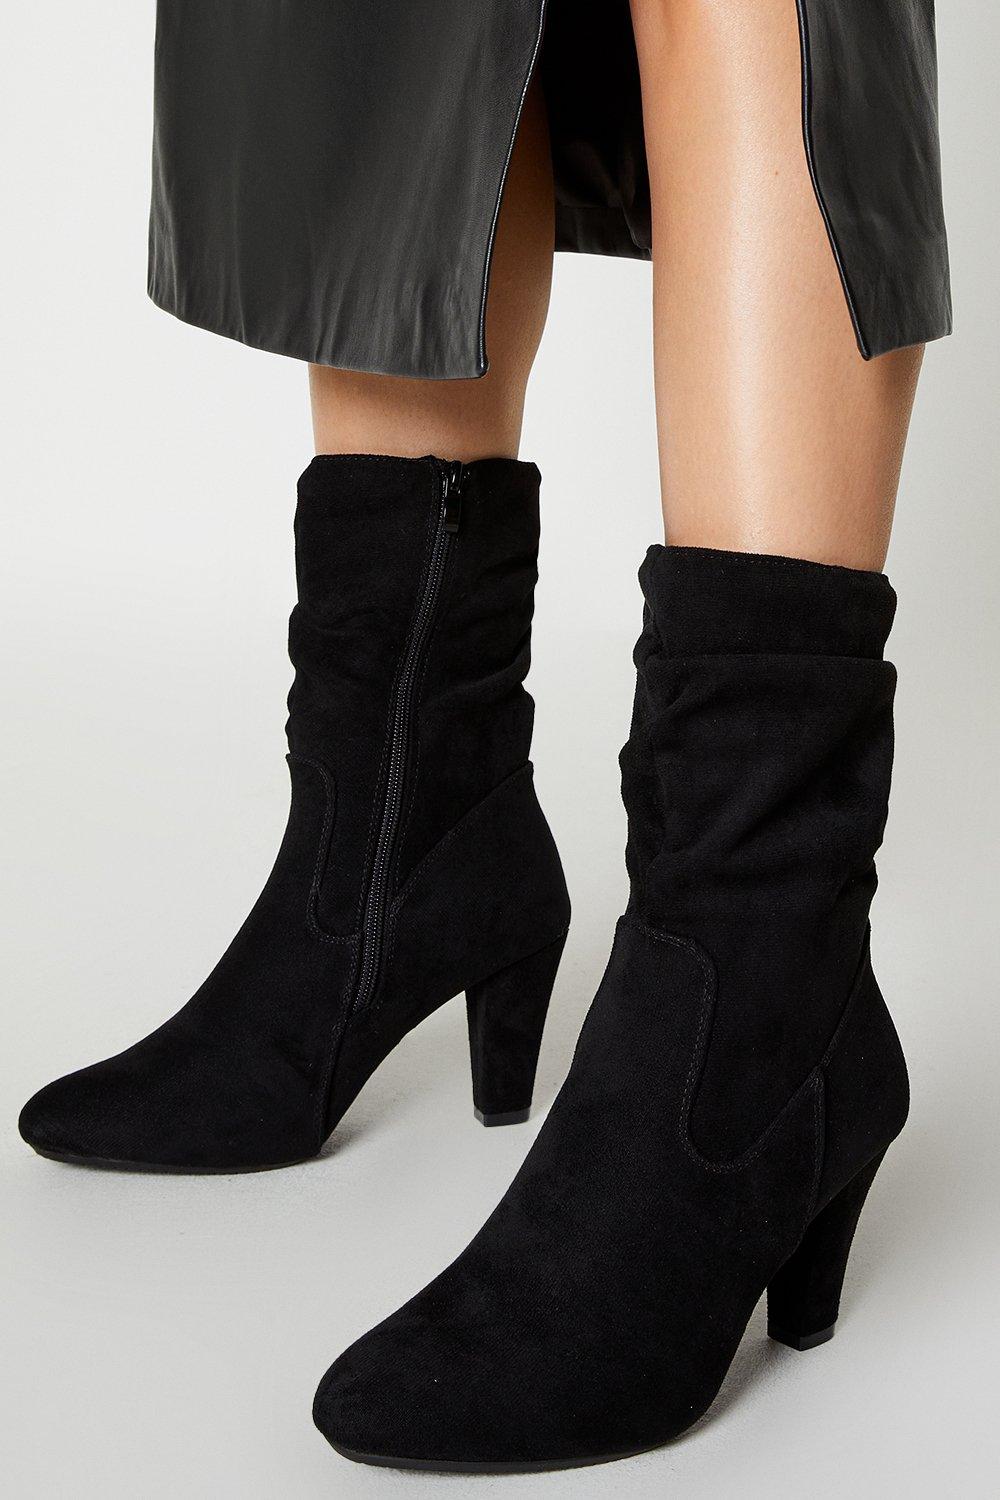 Women's Kayley Ruched Heeled Calf Boots - natural black - 5